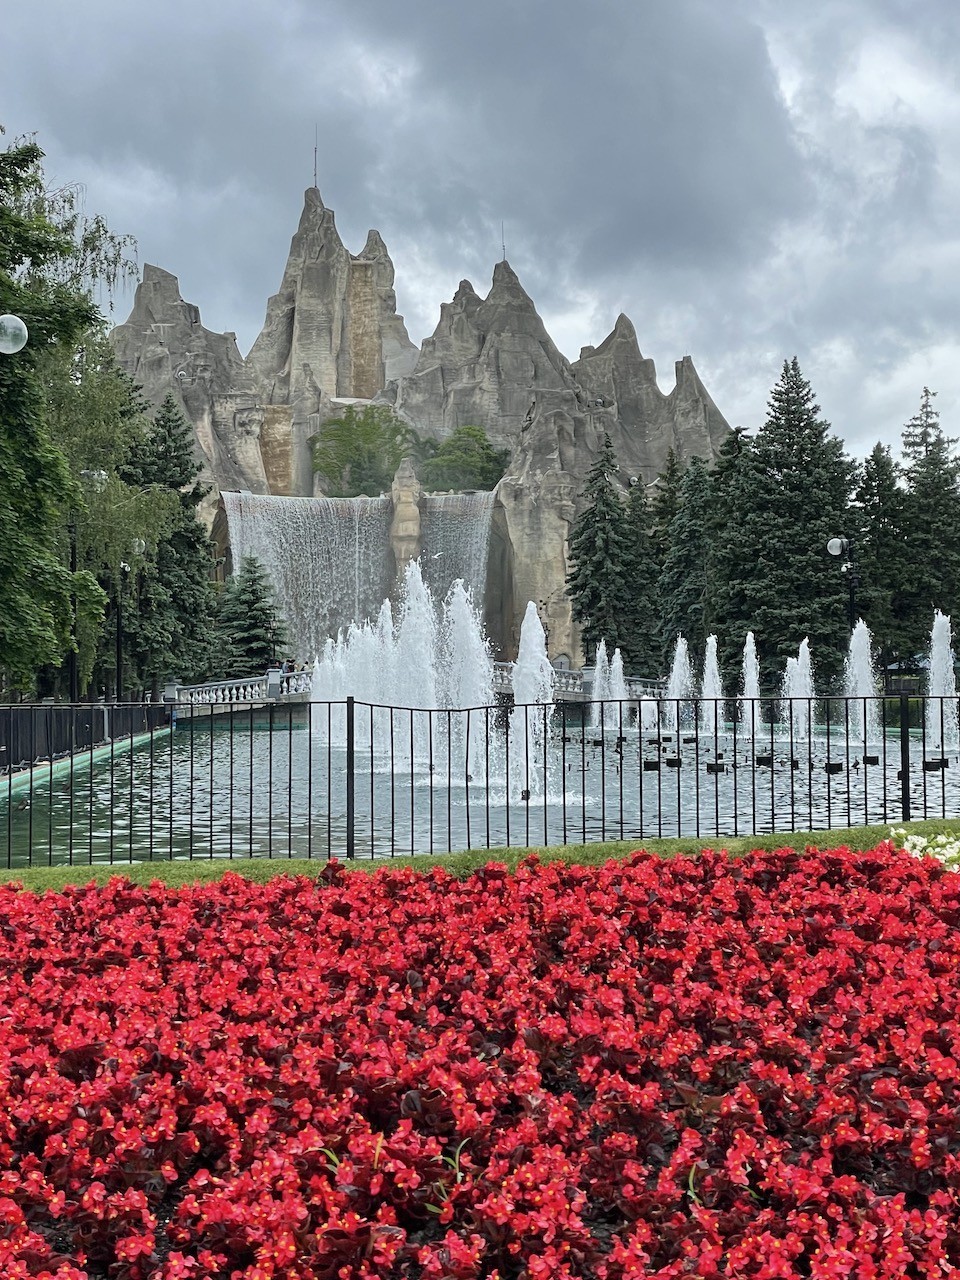 Canada's Wonderland Entrance Vaughan Ontario - As soon as visitors walk through the front gate at Canada's Wonderland, they are welcomed with this the iconic waterfall, fountain and flowerbed view in Vaughan, Ontario. 